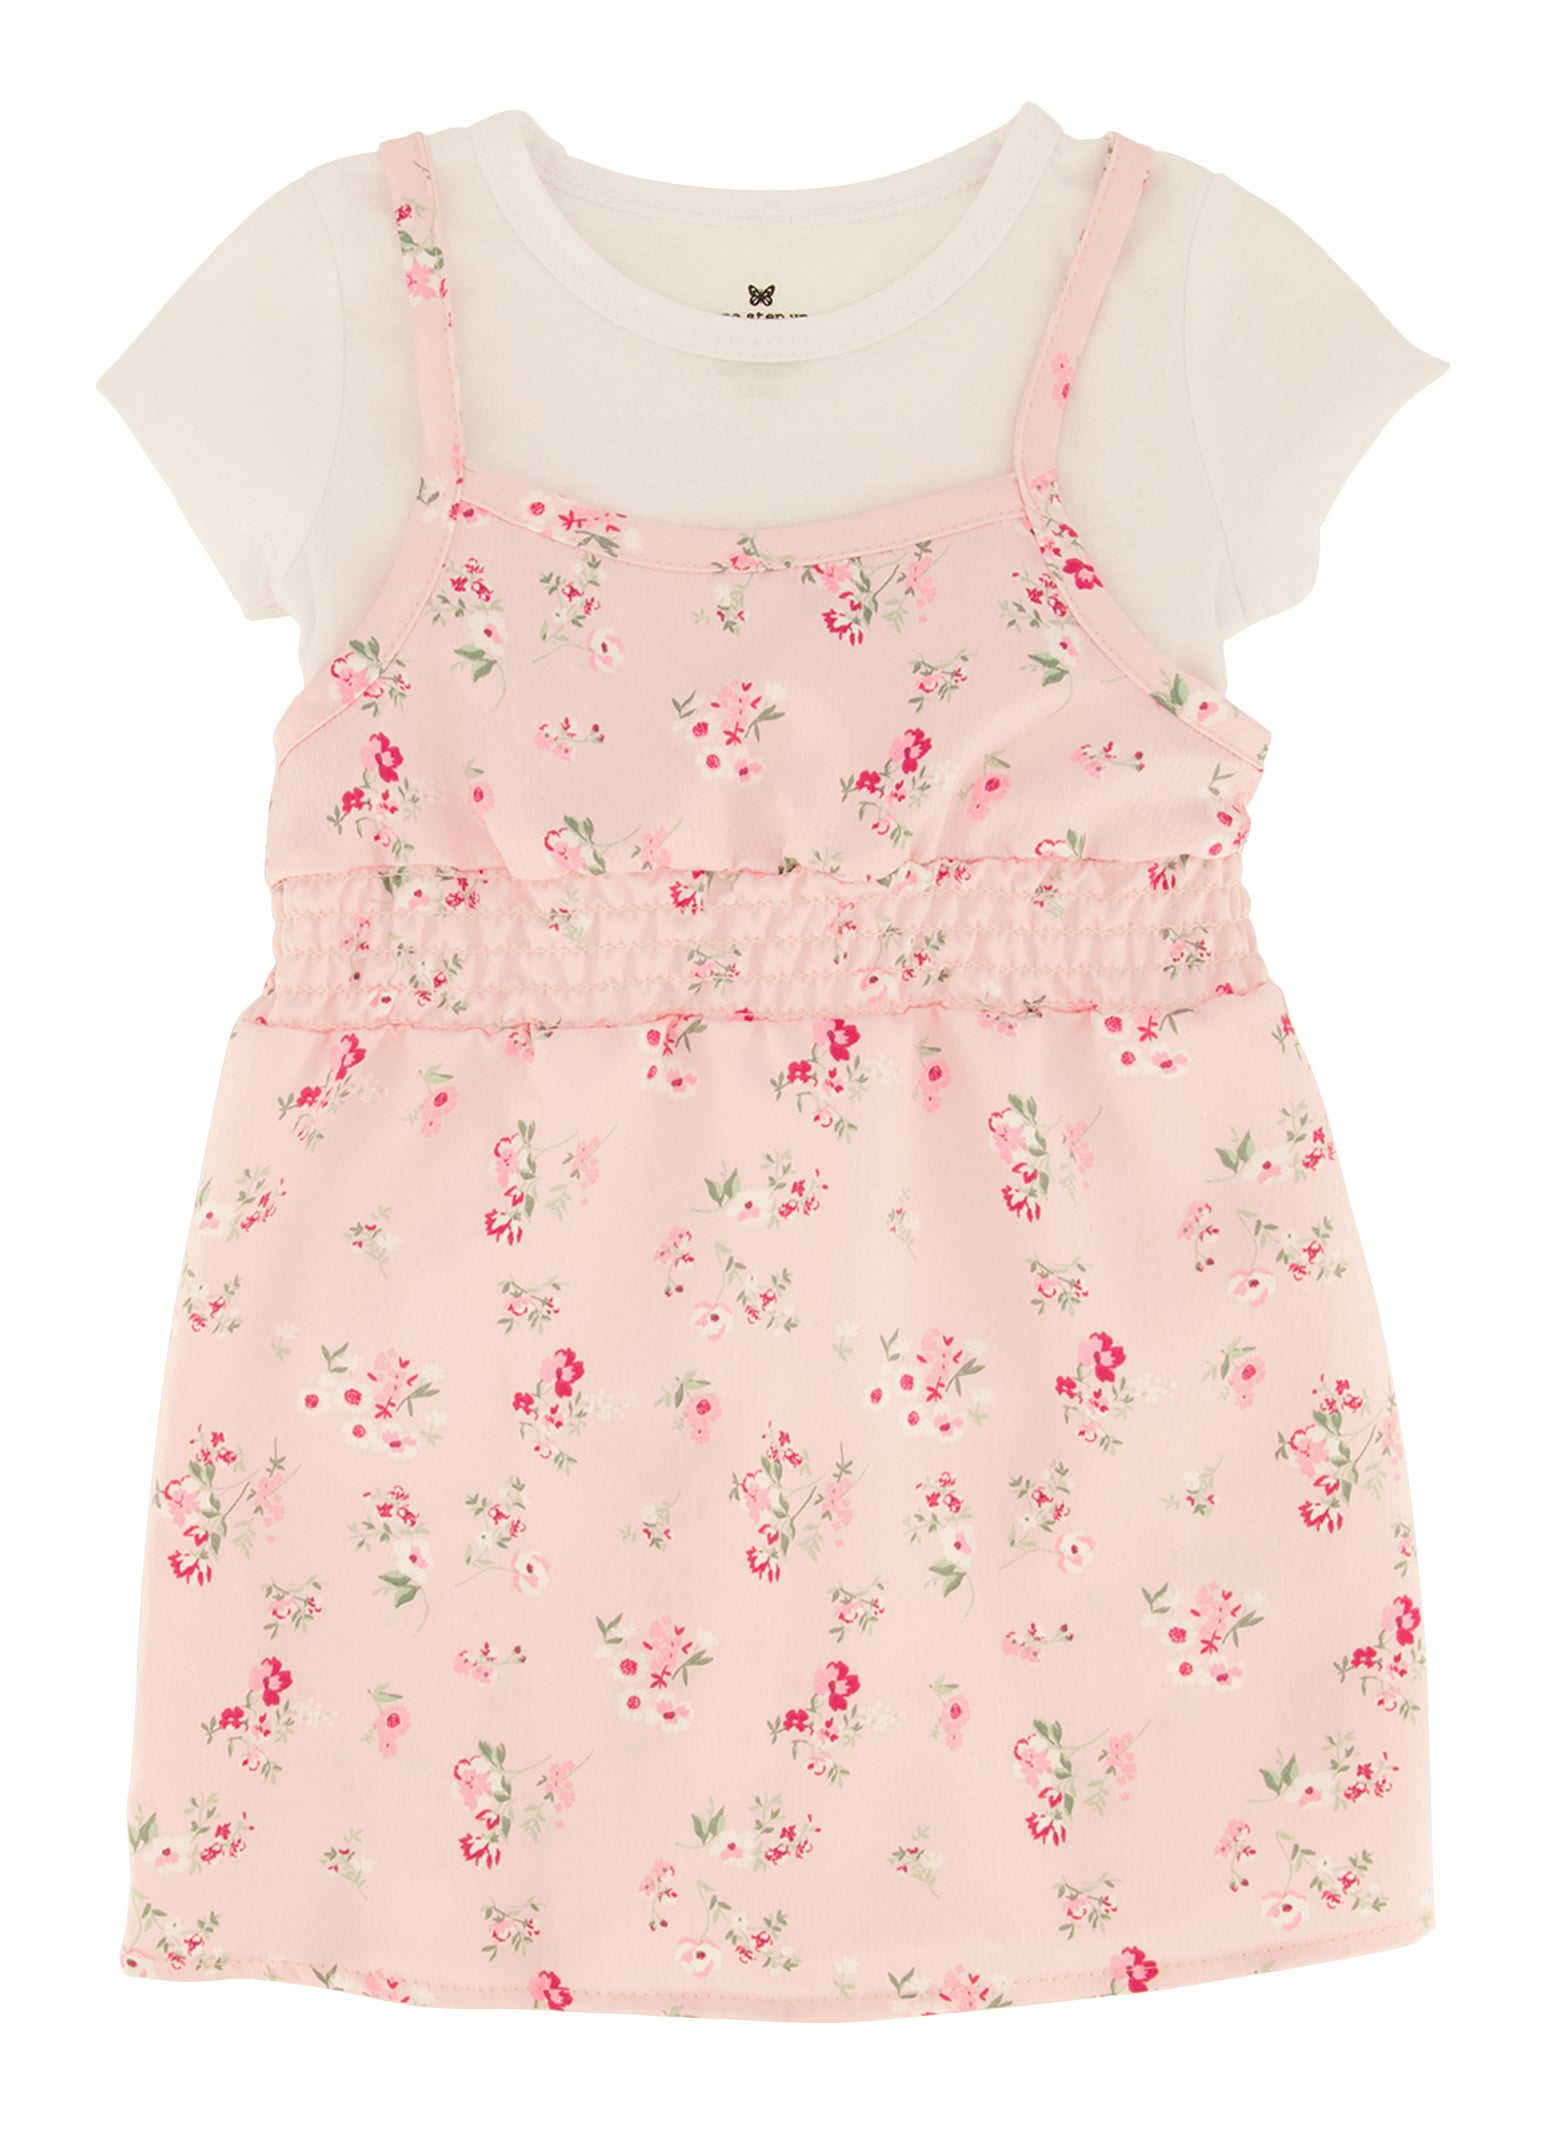 Toddler Girls Floral Print Cami Dress with Short Sleeve Top, Pink, Size 2T